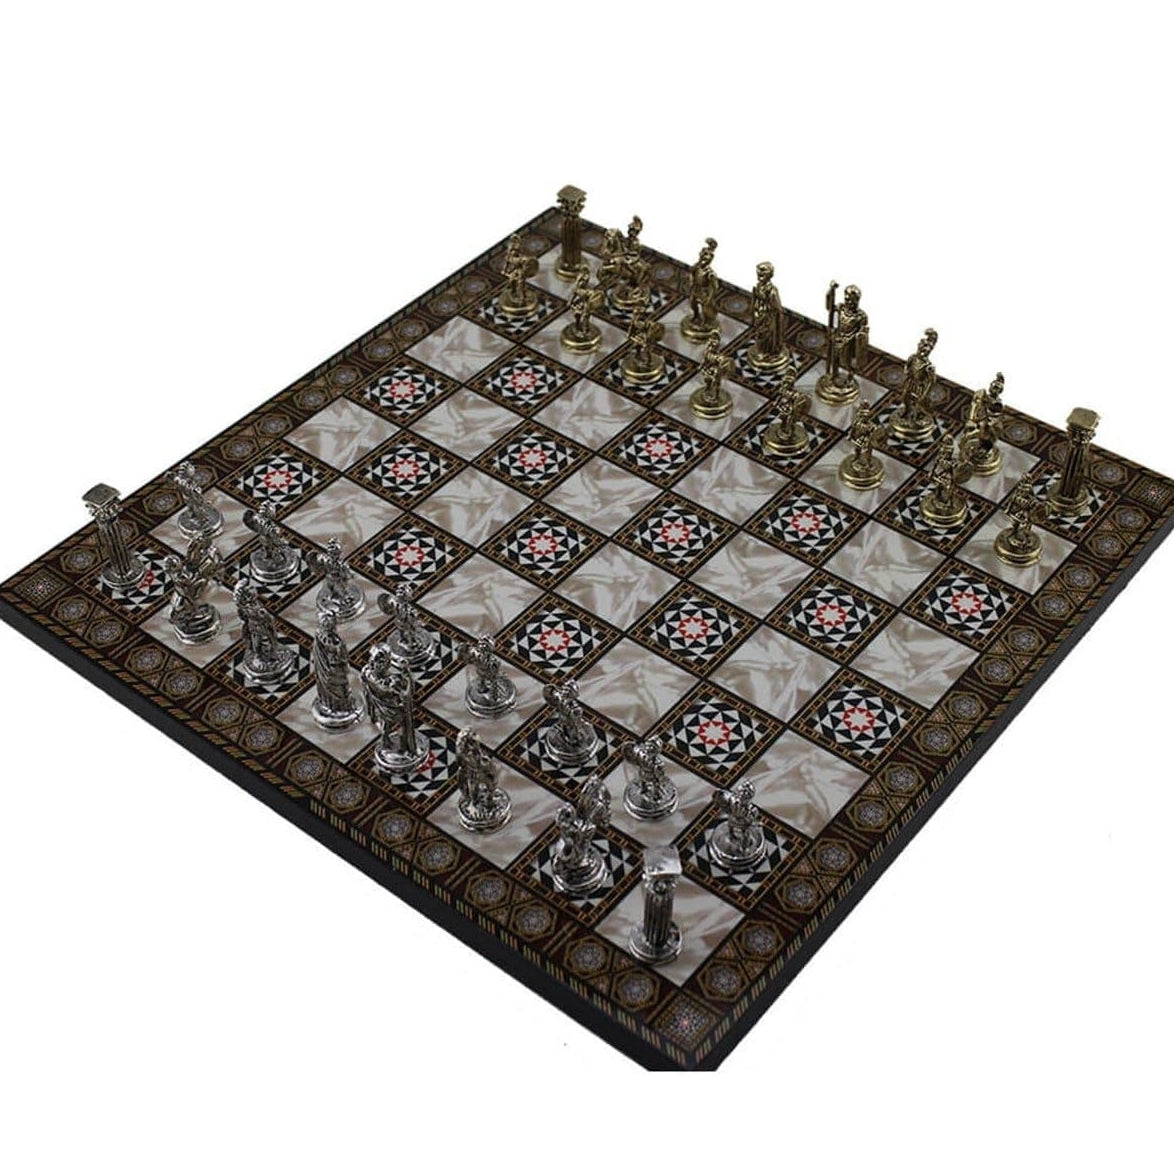 Mosaic Designer Chess Board | Historical Roman Hand Crafted Chess Pieces | Complete Classic Set | whatagift.com.au.